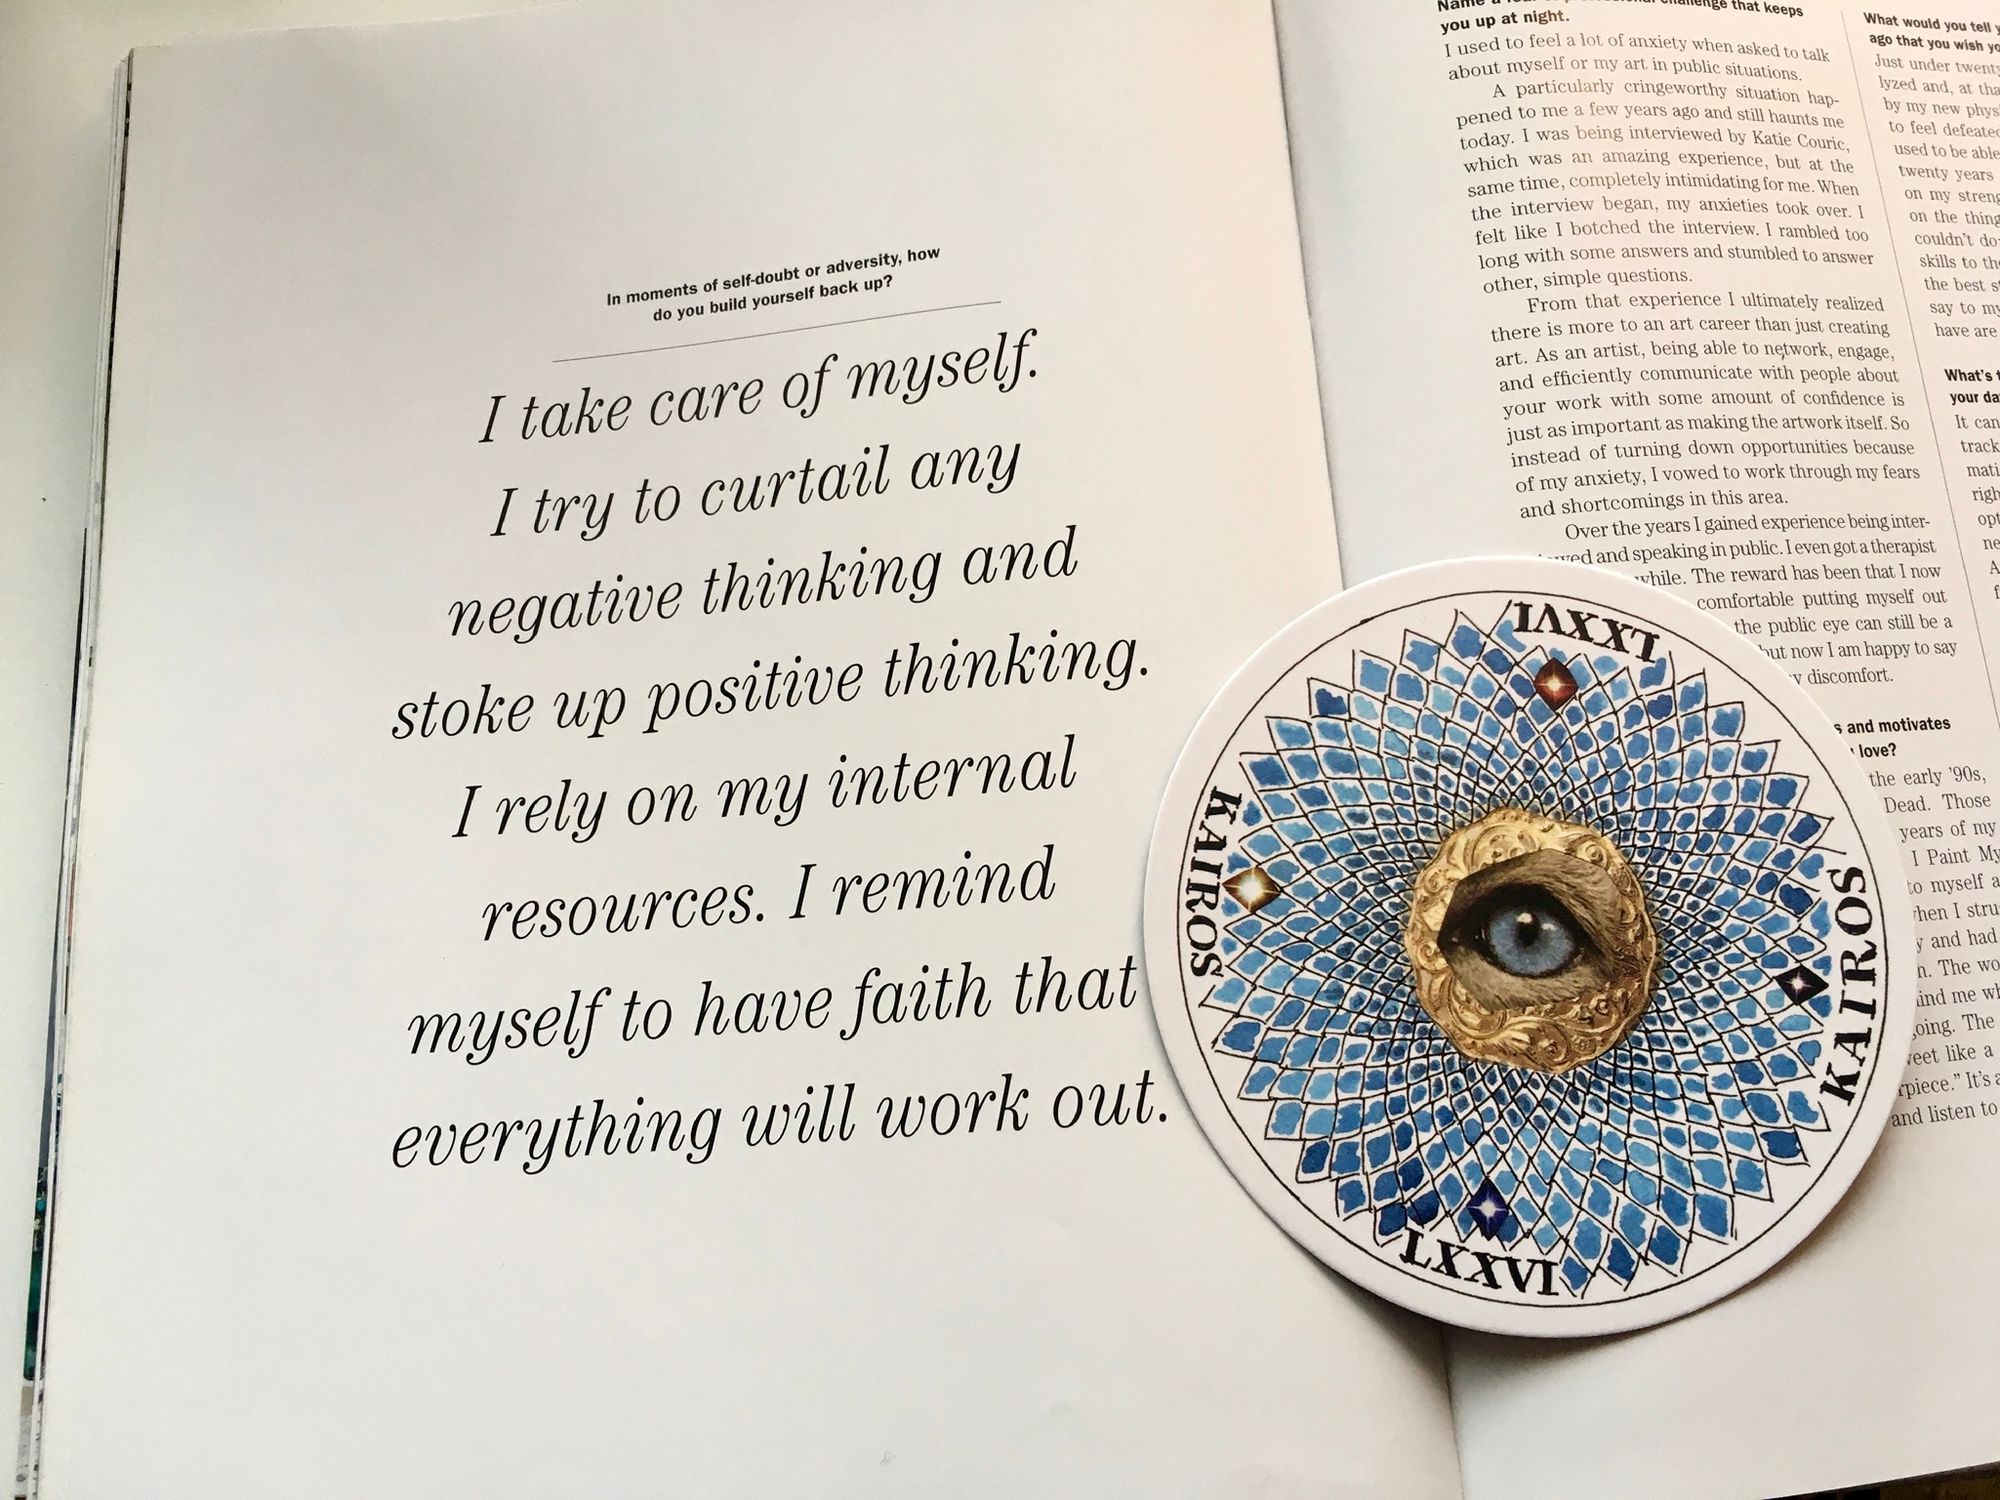 page of large book opened to large type quote on left page (read below) and circular Kairos card with blue prism-like design with furry animal eye cut out in center of card